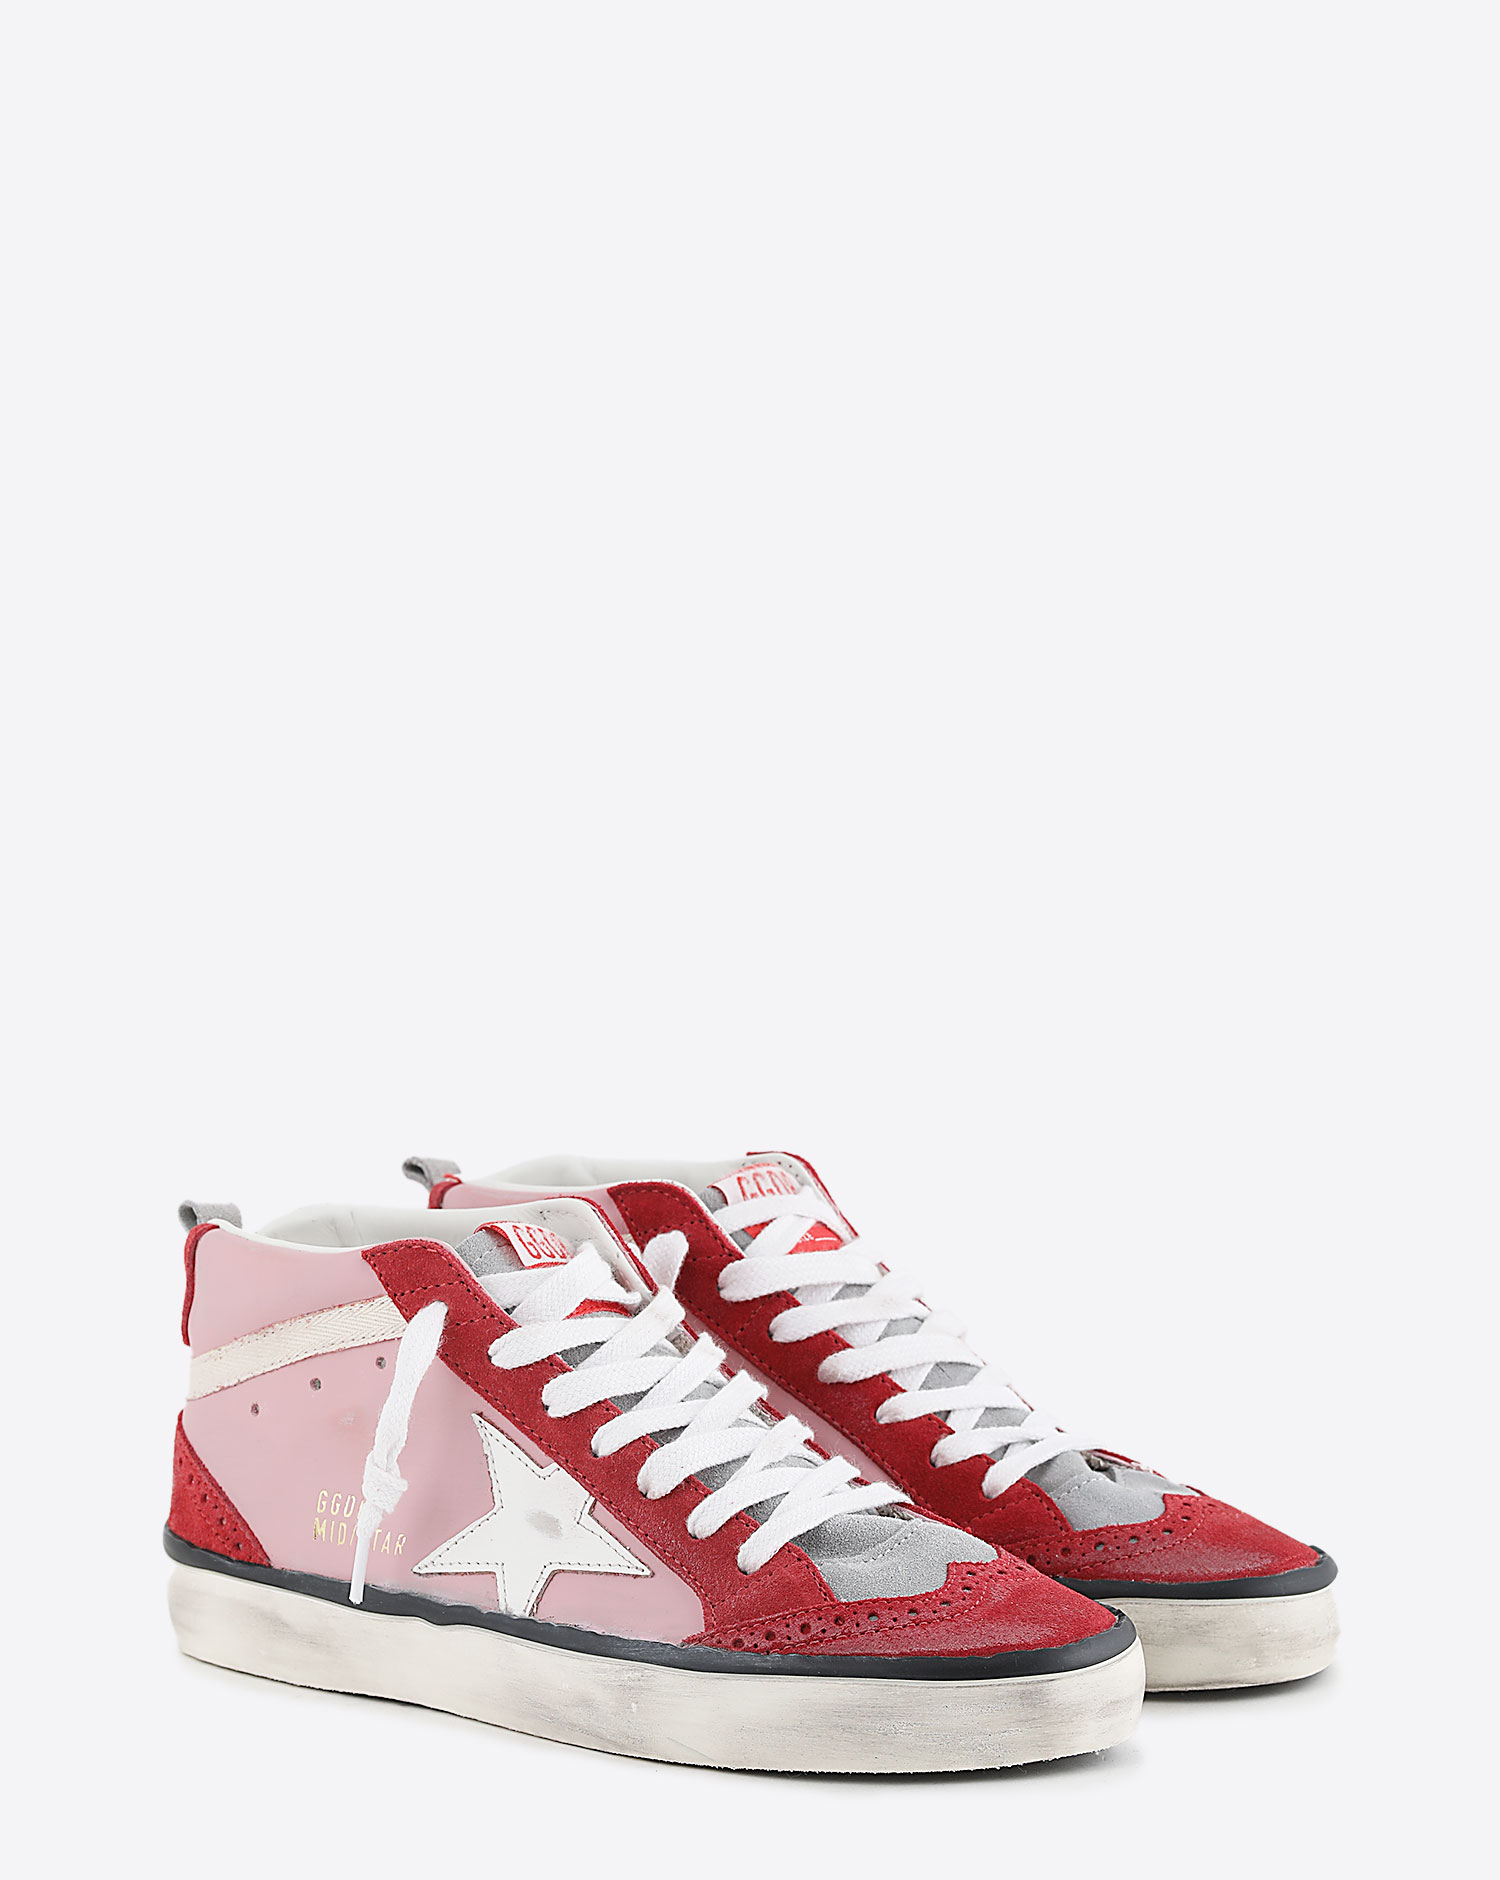 Sneakers Mid Star Pink Red White 82182 Golden Goose 